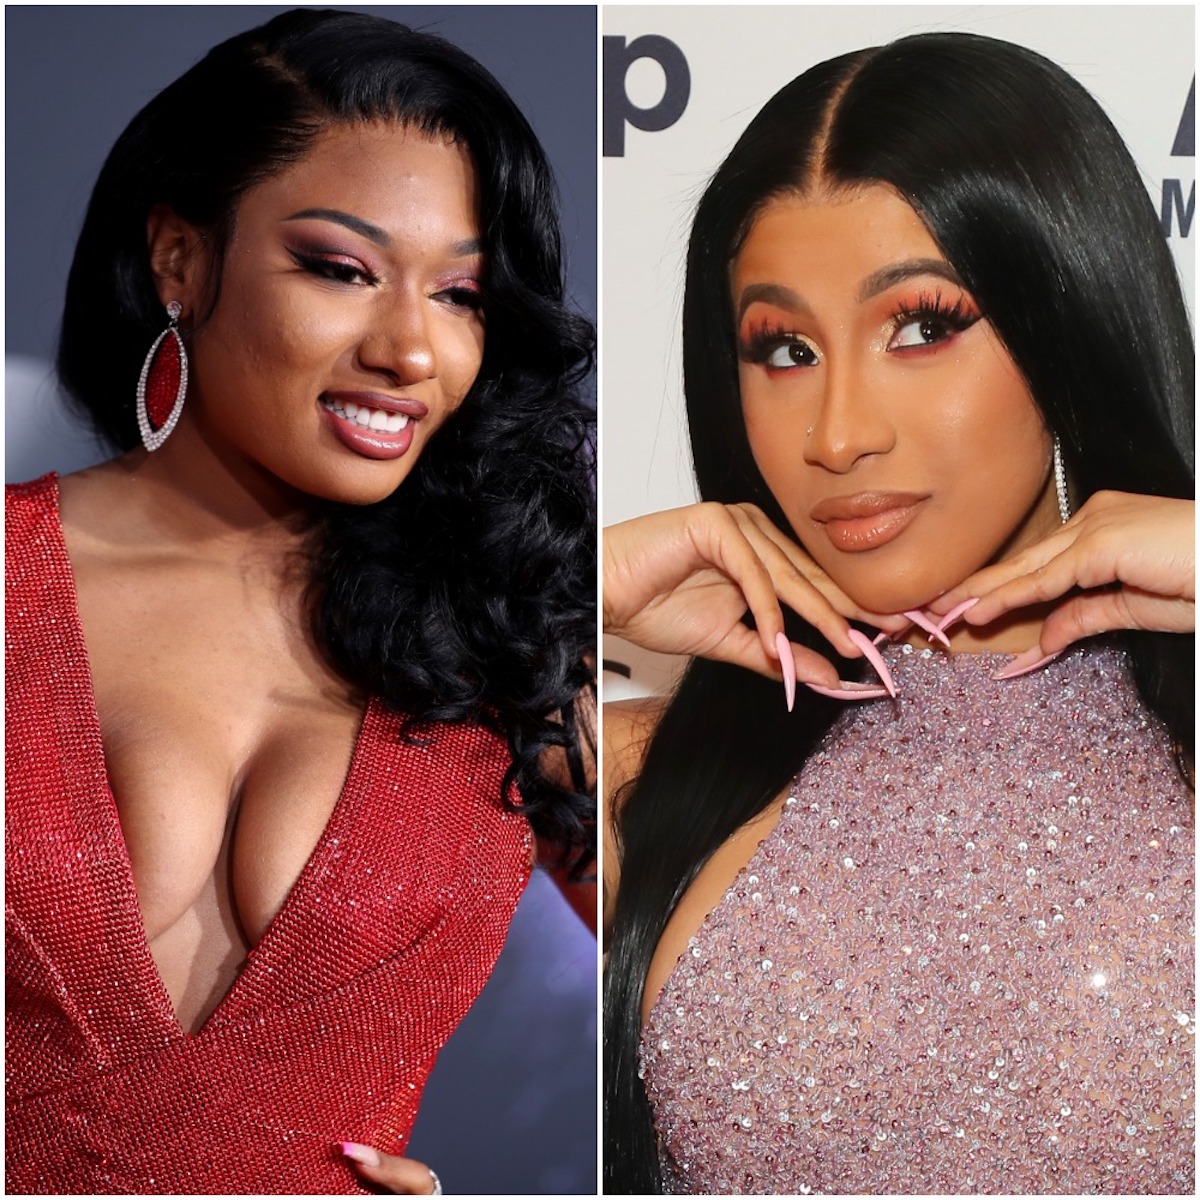 Cardi B Says She Was Too Shy to Speak to Megan Thee Stallion for a Whole Year